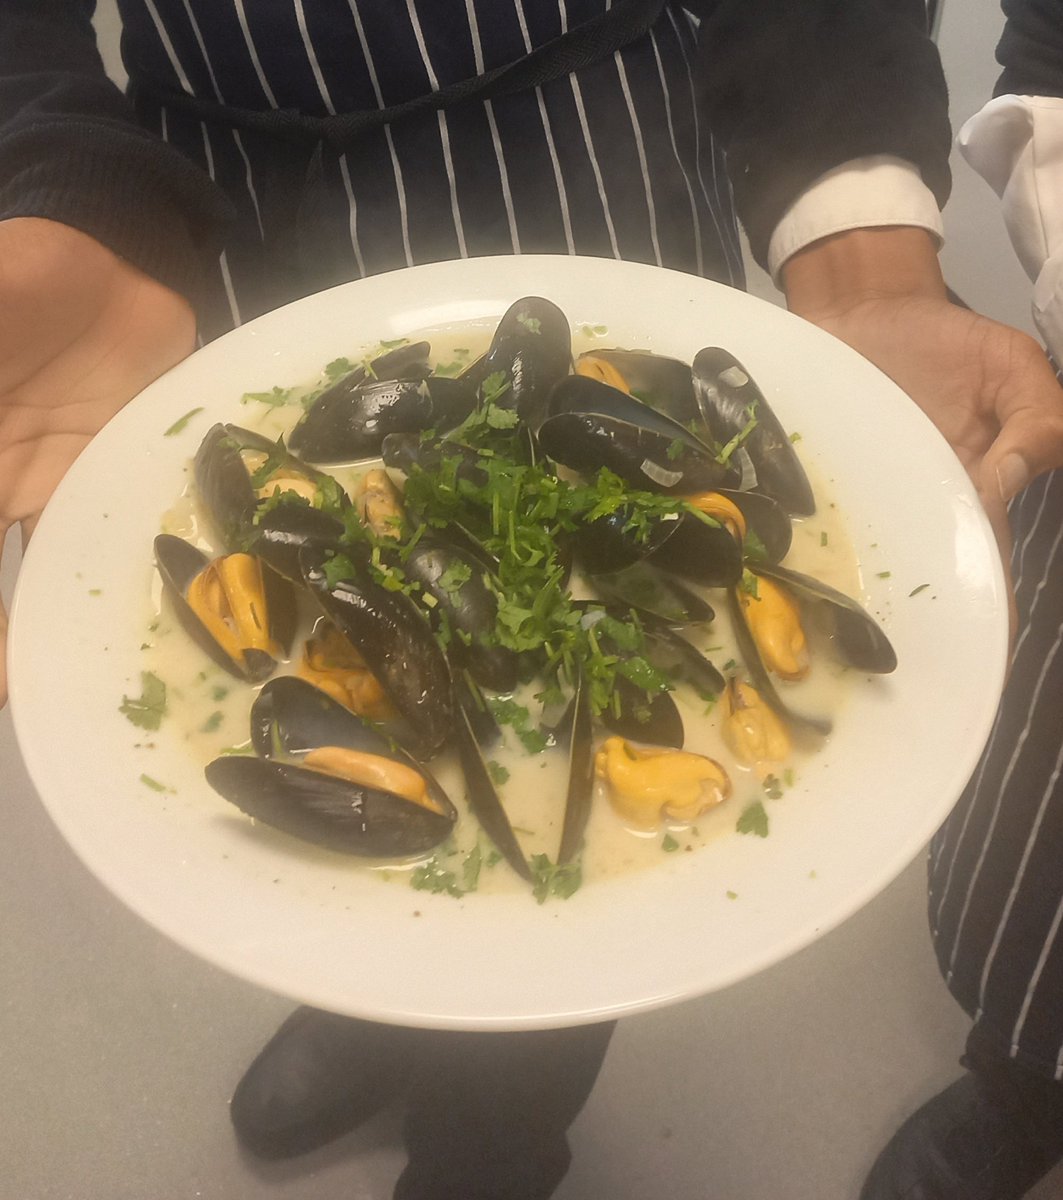 Thank you to @FoodTCentre @OffshoreShell @mjseafood @FreshDirect @SyscoSpeciality for our amazing mussels. Y10 @SaracensHighSch loved cooking and tasting them. #fishheroes #musselpower